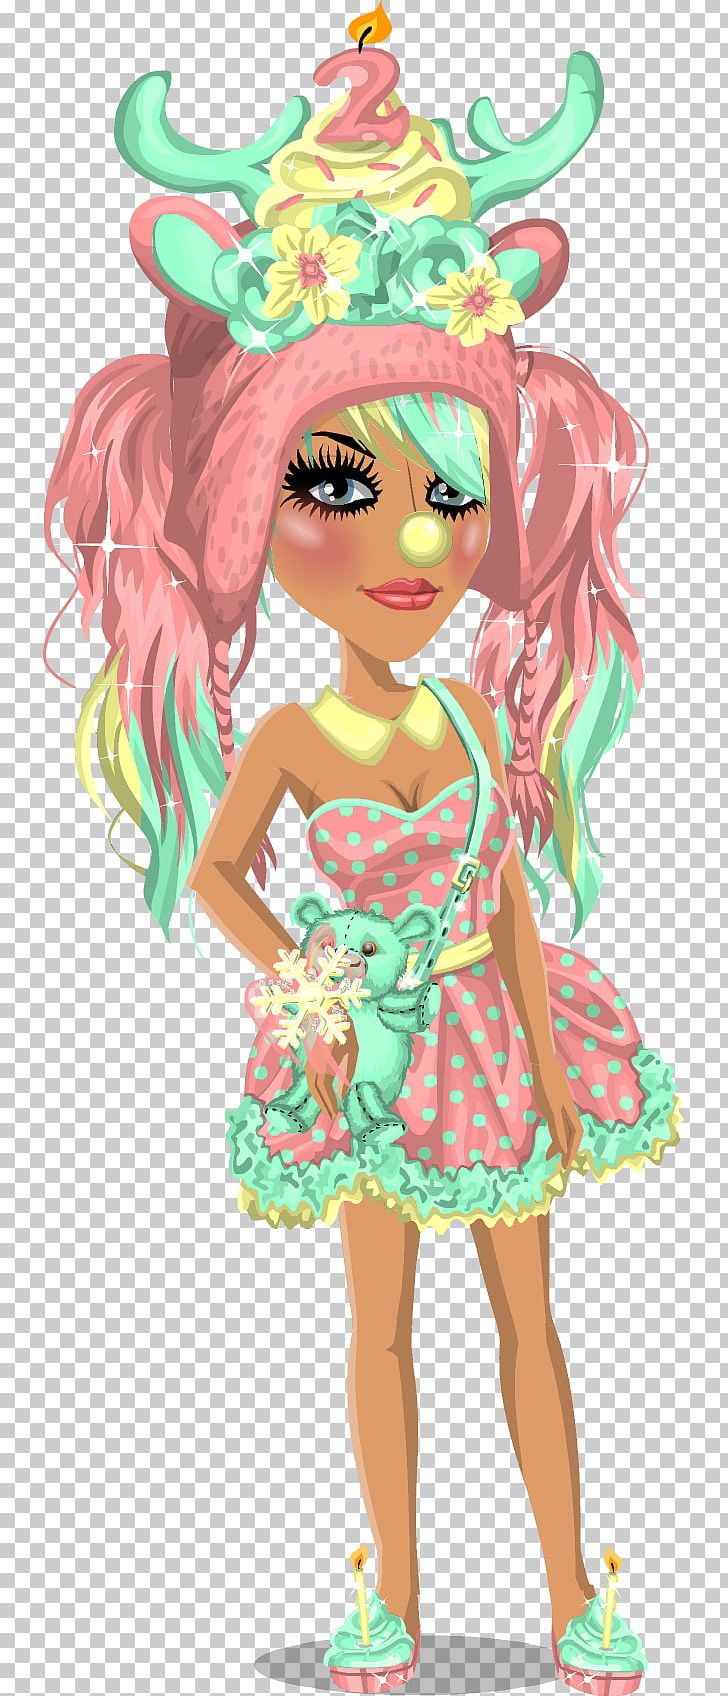 MovieStarPlanet YouTube Game Film PNG, Clipart, Art, Barbie, Blog, Doll, Dress Free PNG Download